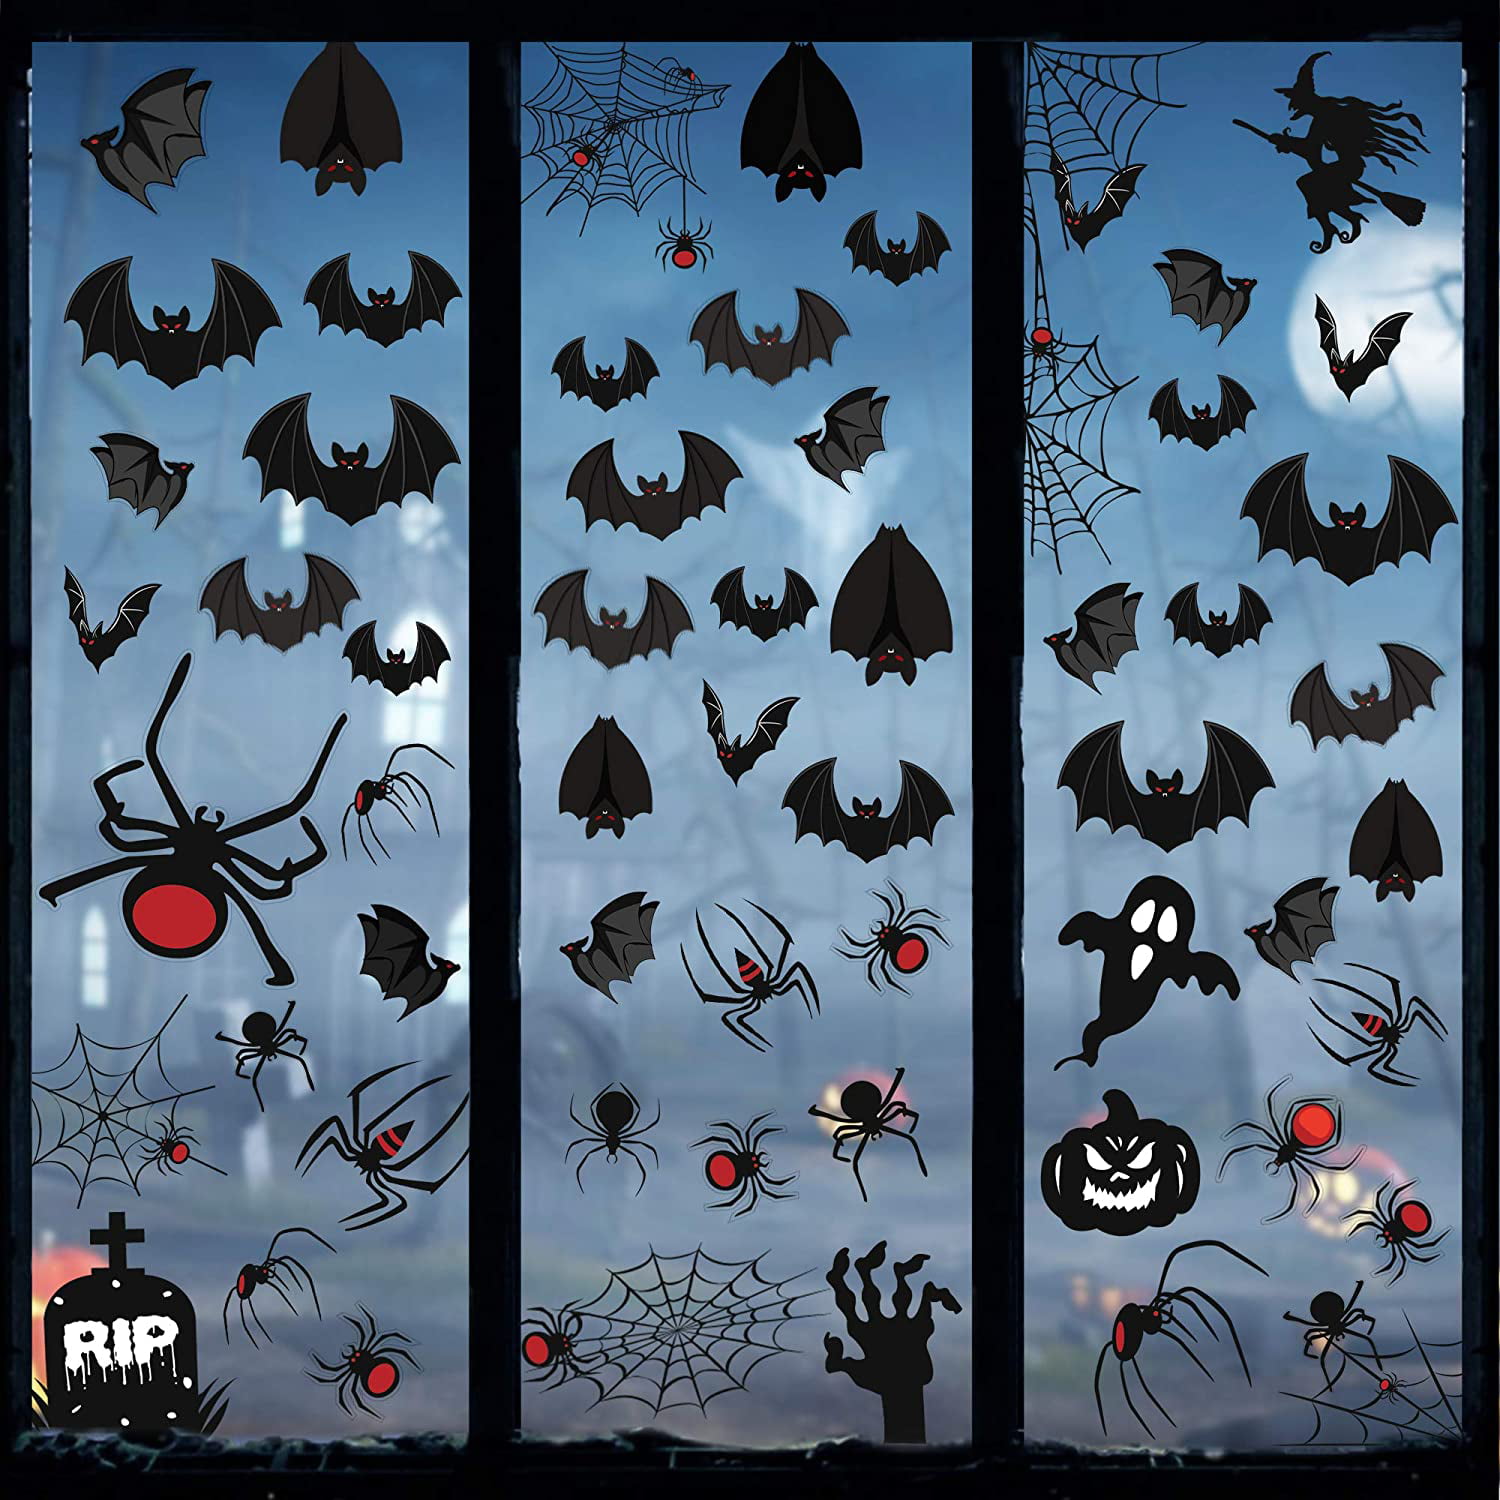 4 Sheets Halloween Window Stickers Halloween Scary Large Bats Spider Window Decor Electrostatic Sticker Bat Sticker Spider Sticker Halloween Window Clings for Halloween Party Home Kids Shop School